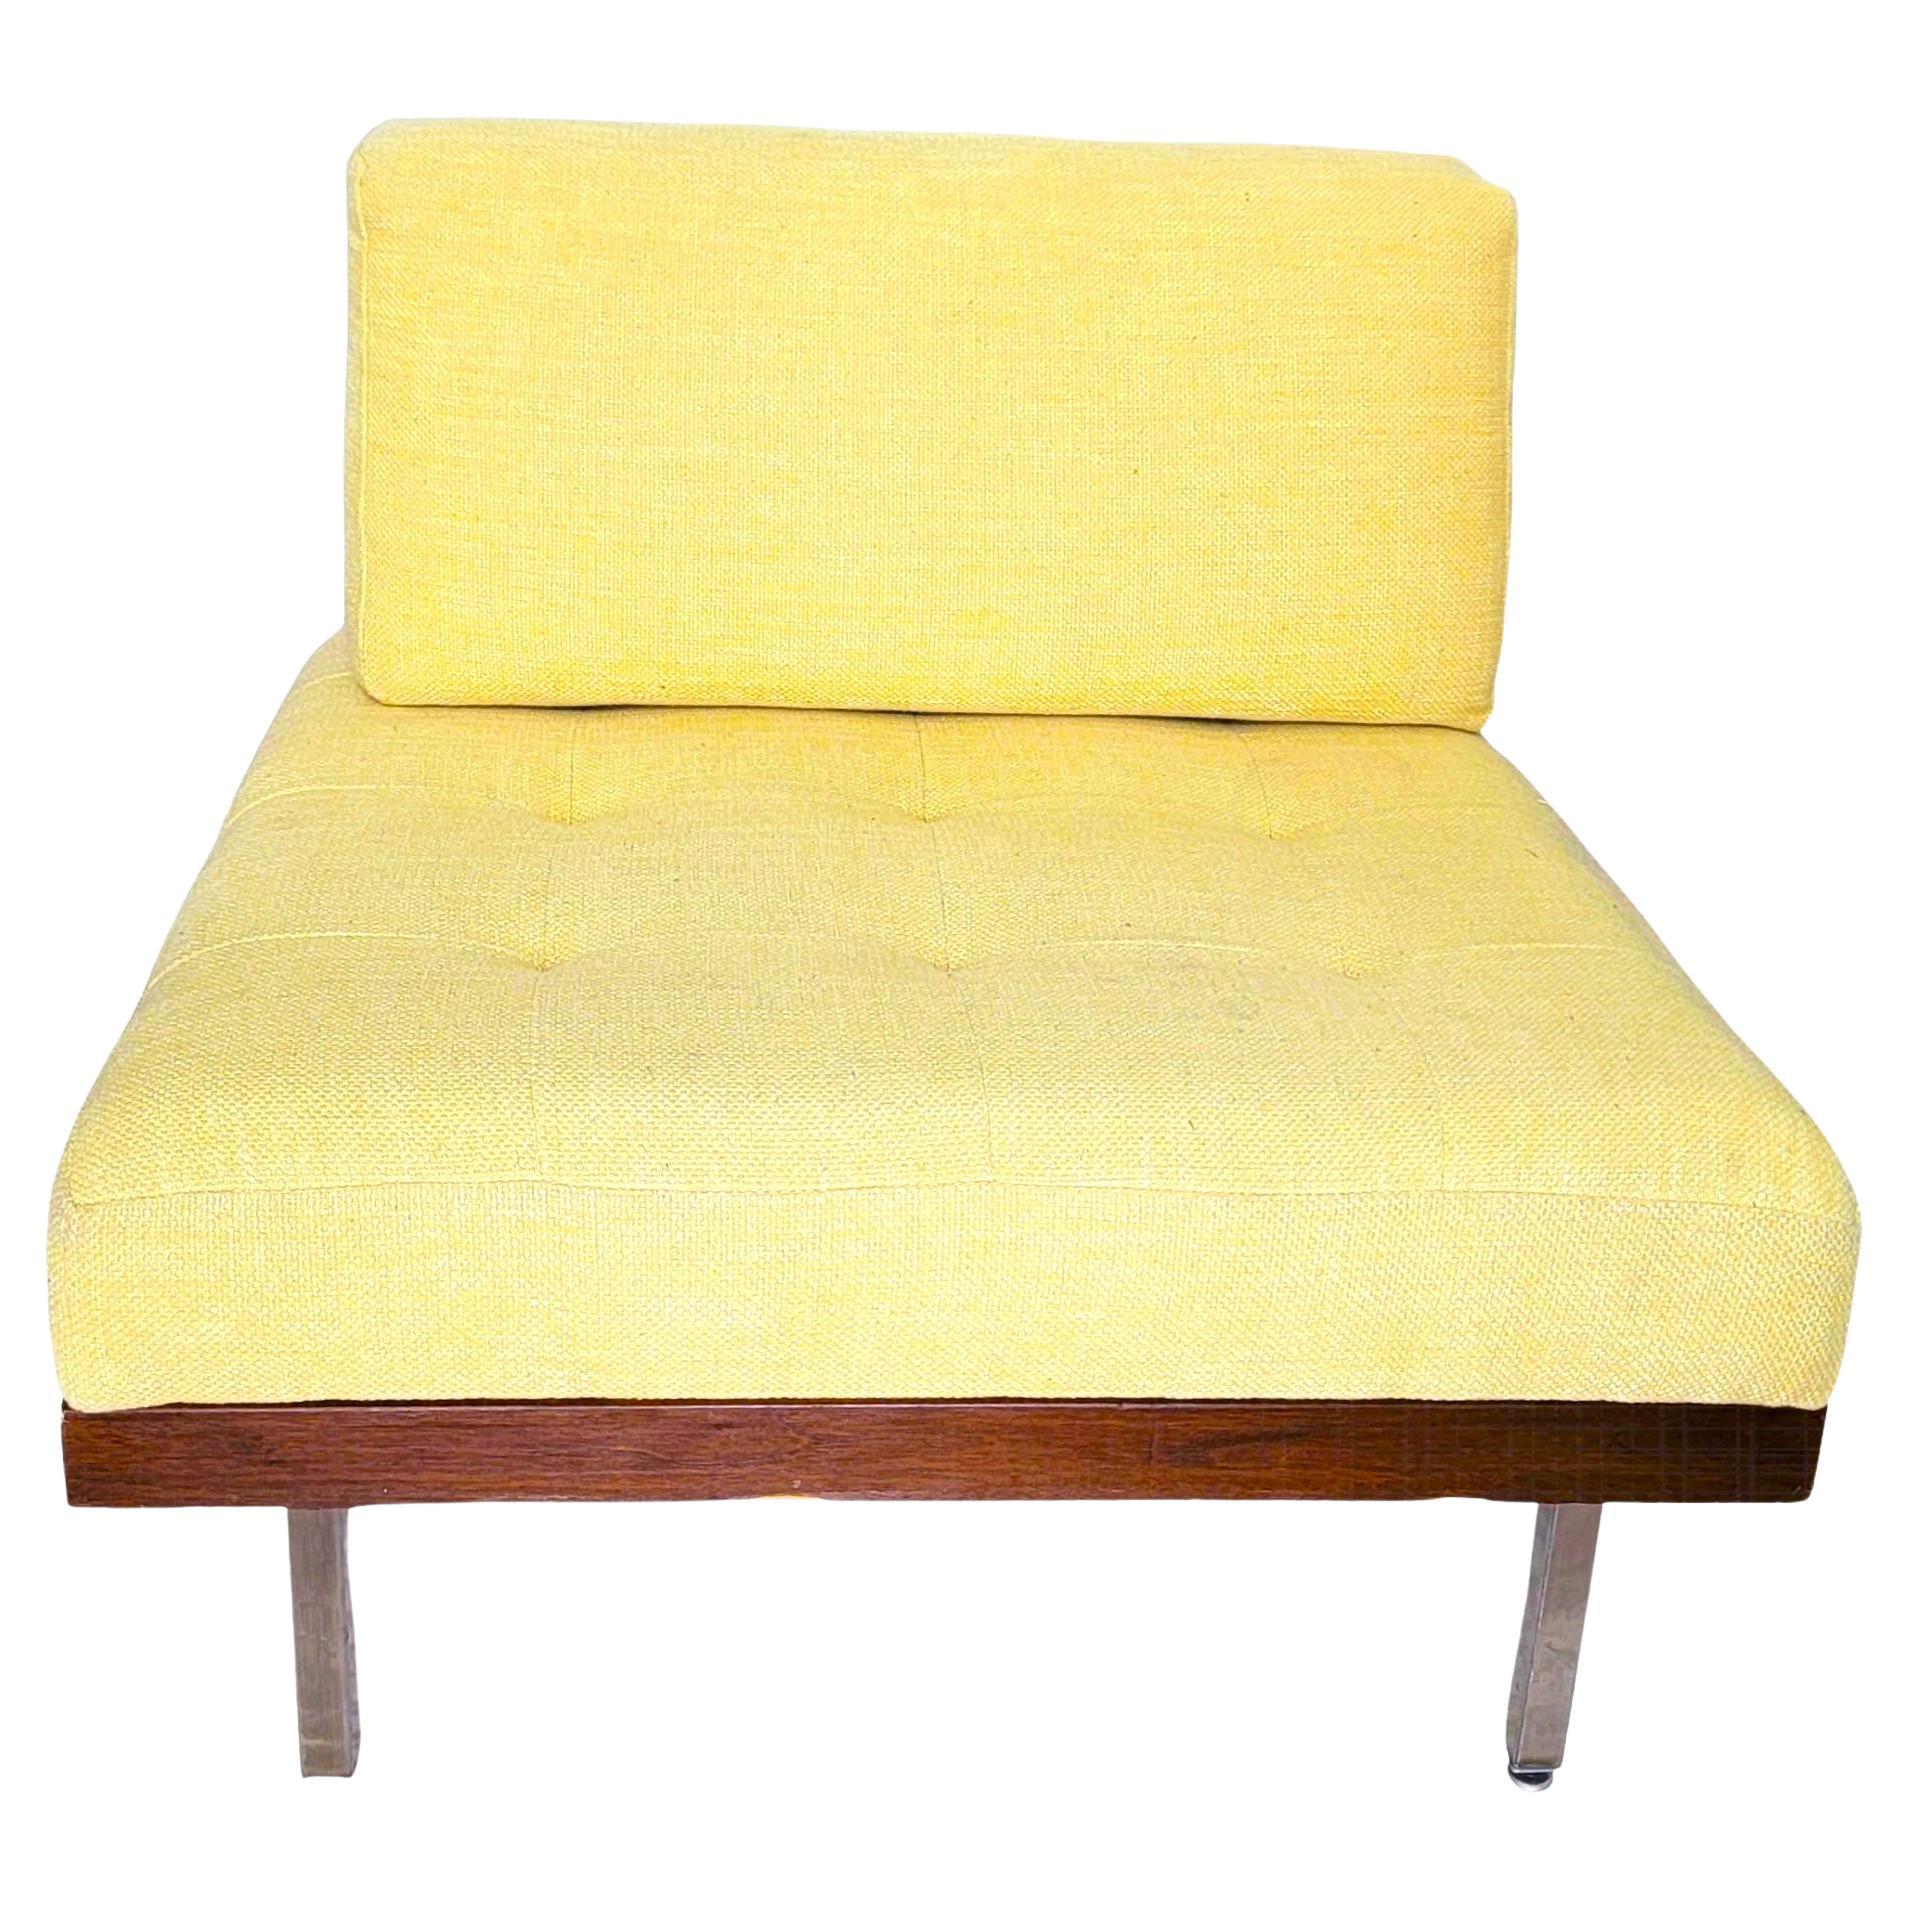 Mid Century Peter Hvidt lounge chair, Upholstery done by GTO Upholstery. Measures approx - 27.5 x 30 x 30